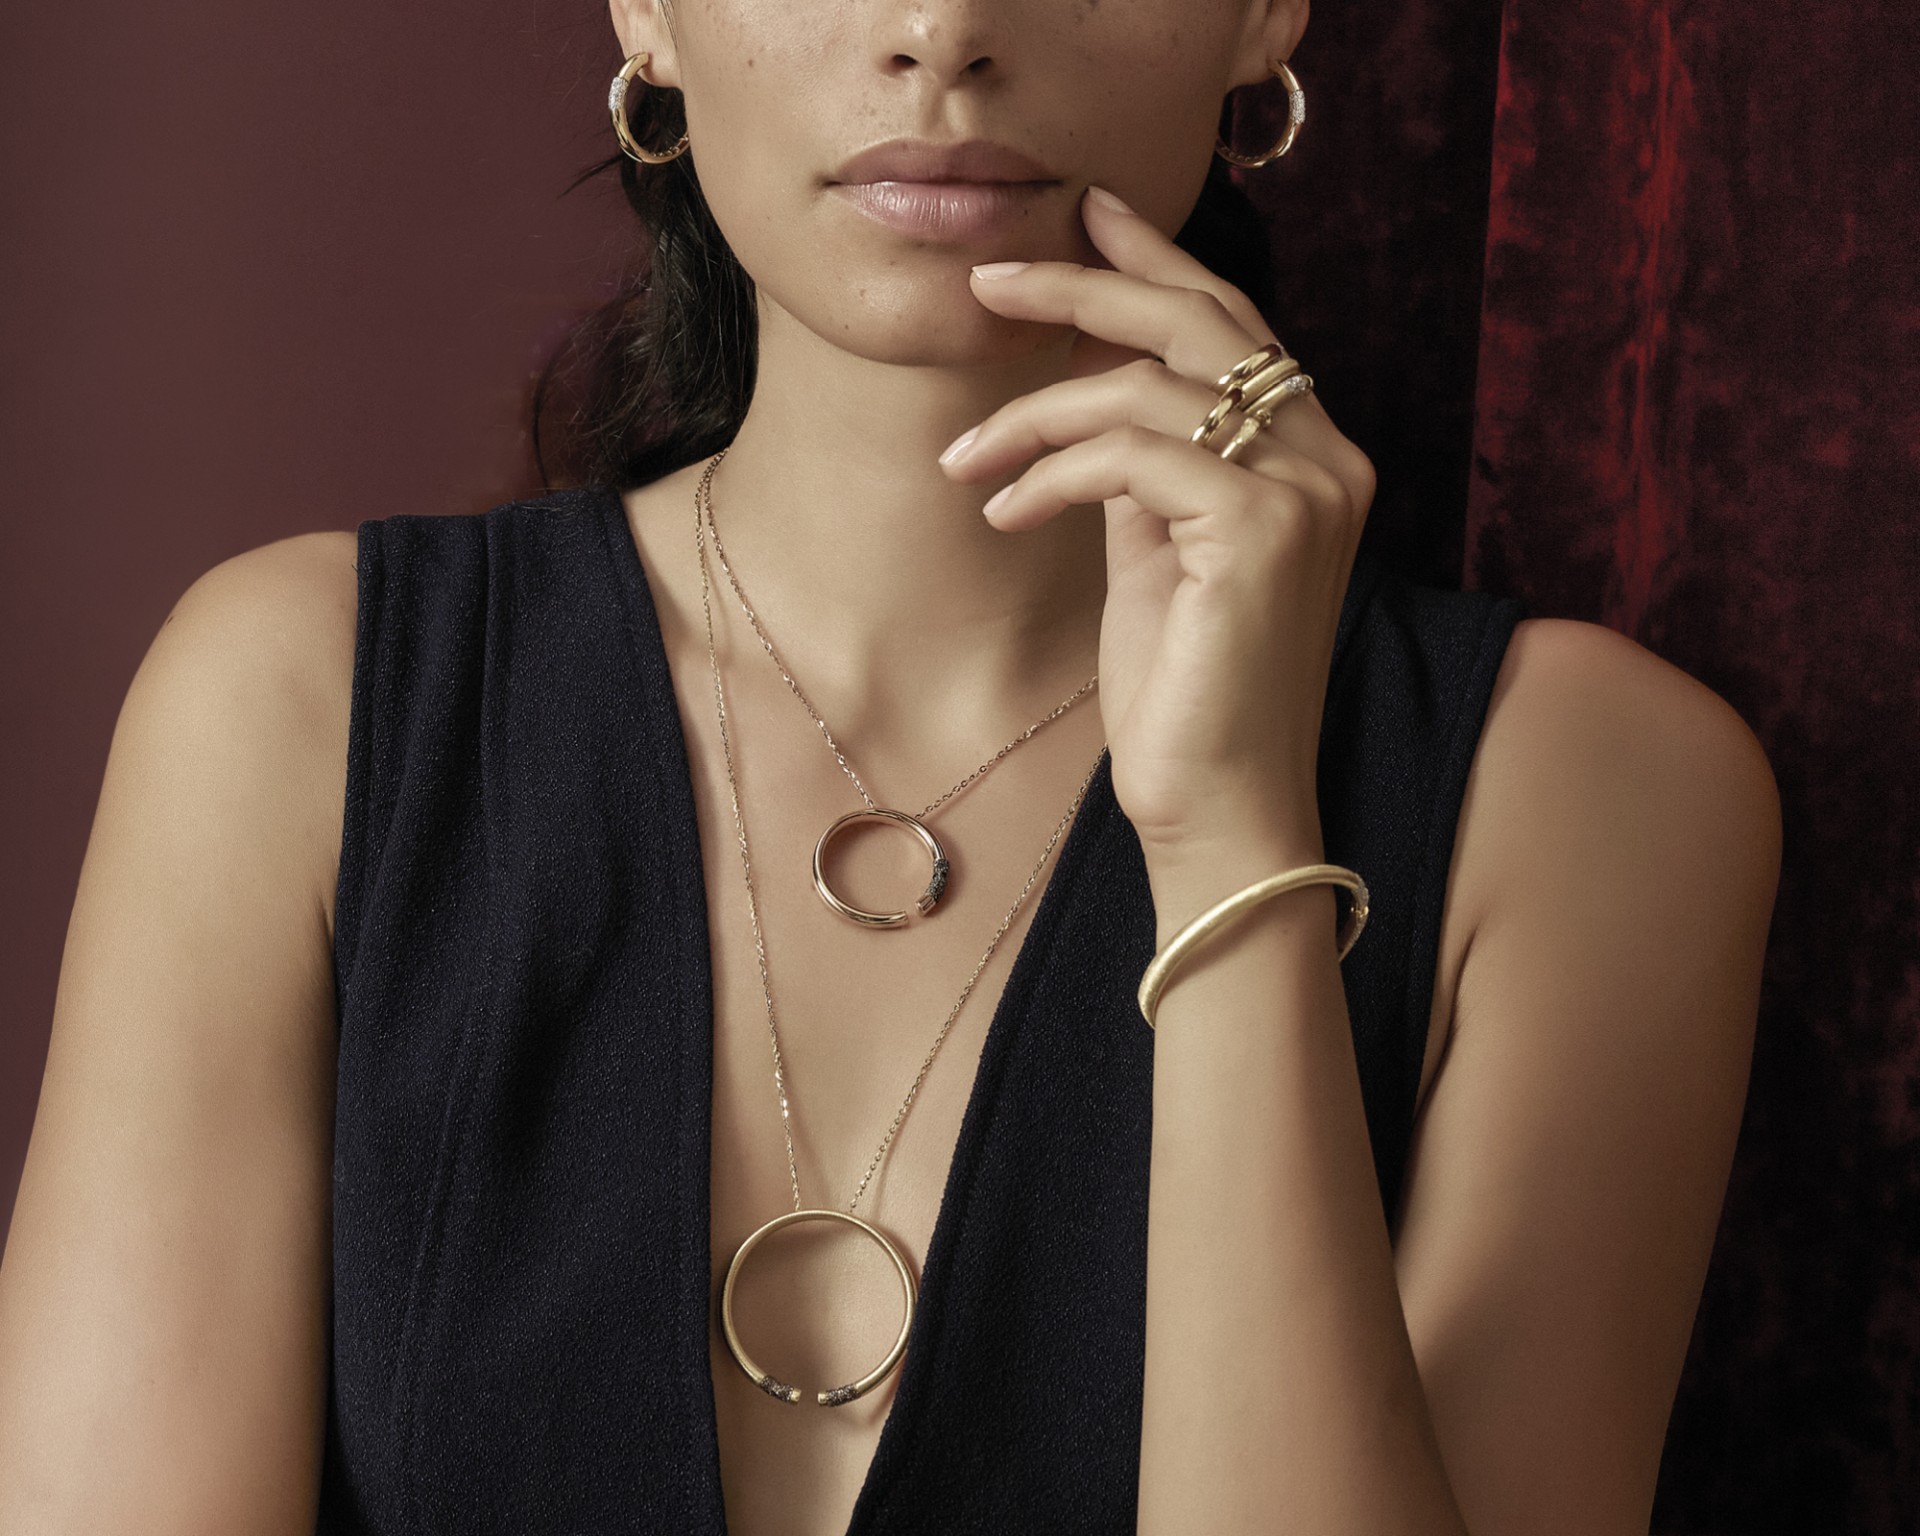 model with set of earrings, necklace, bracelet and rings